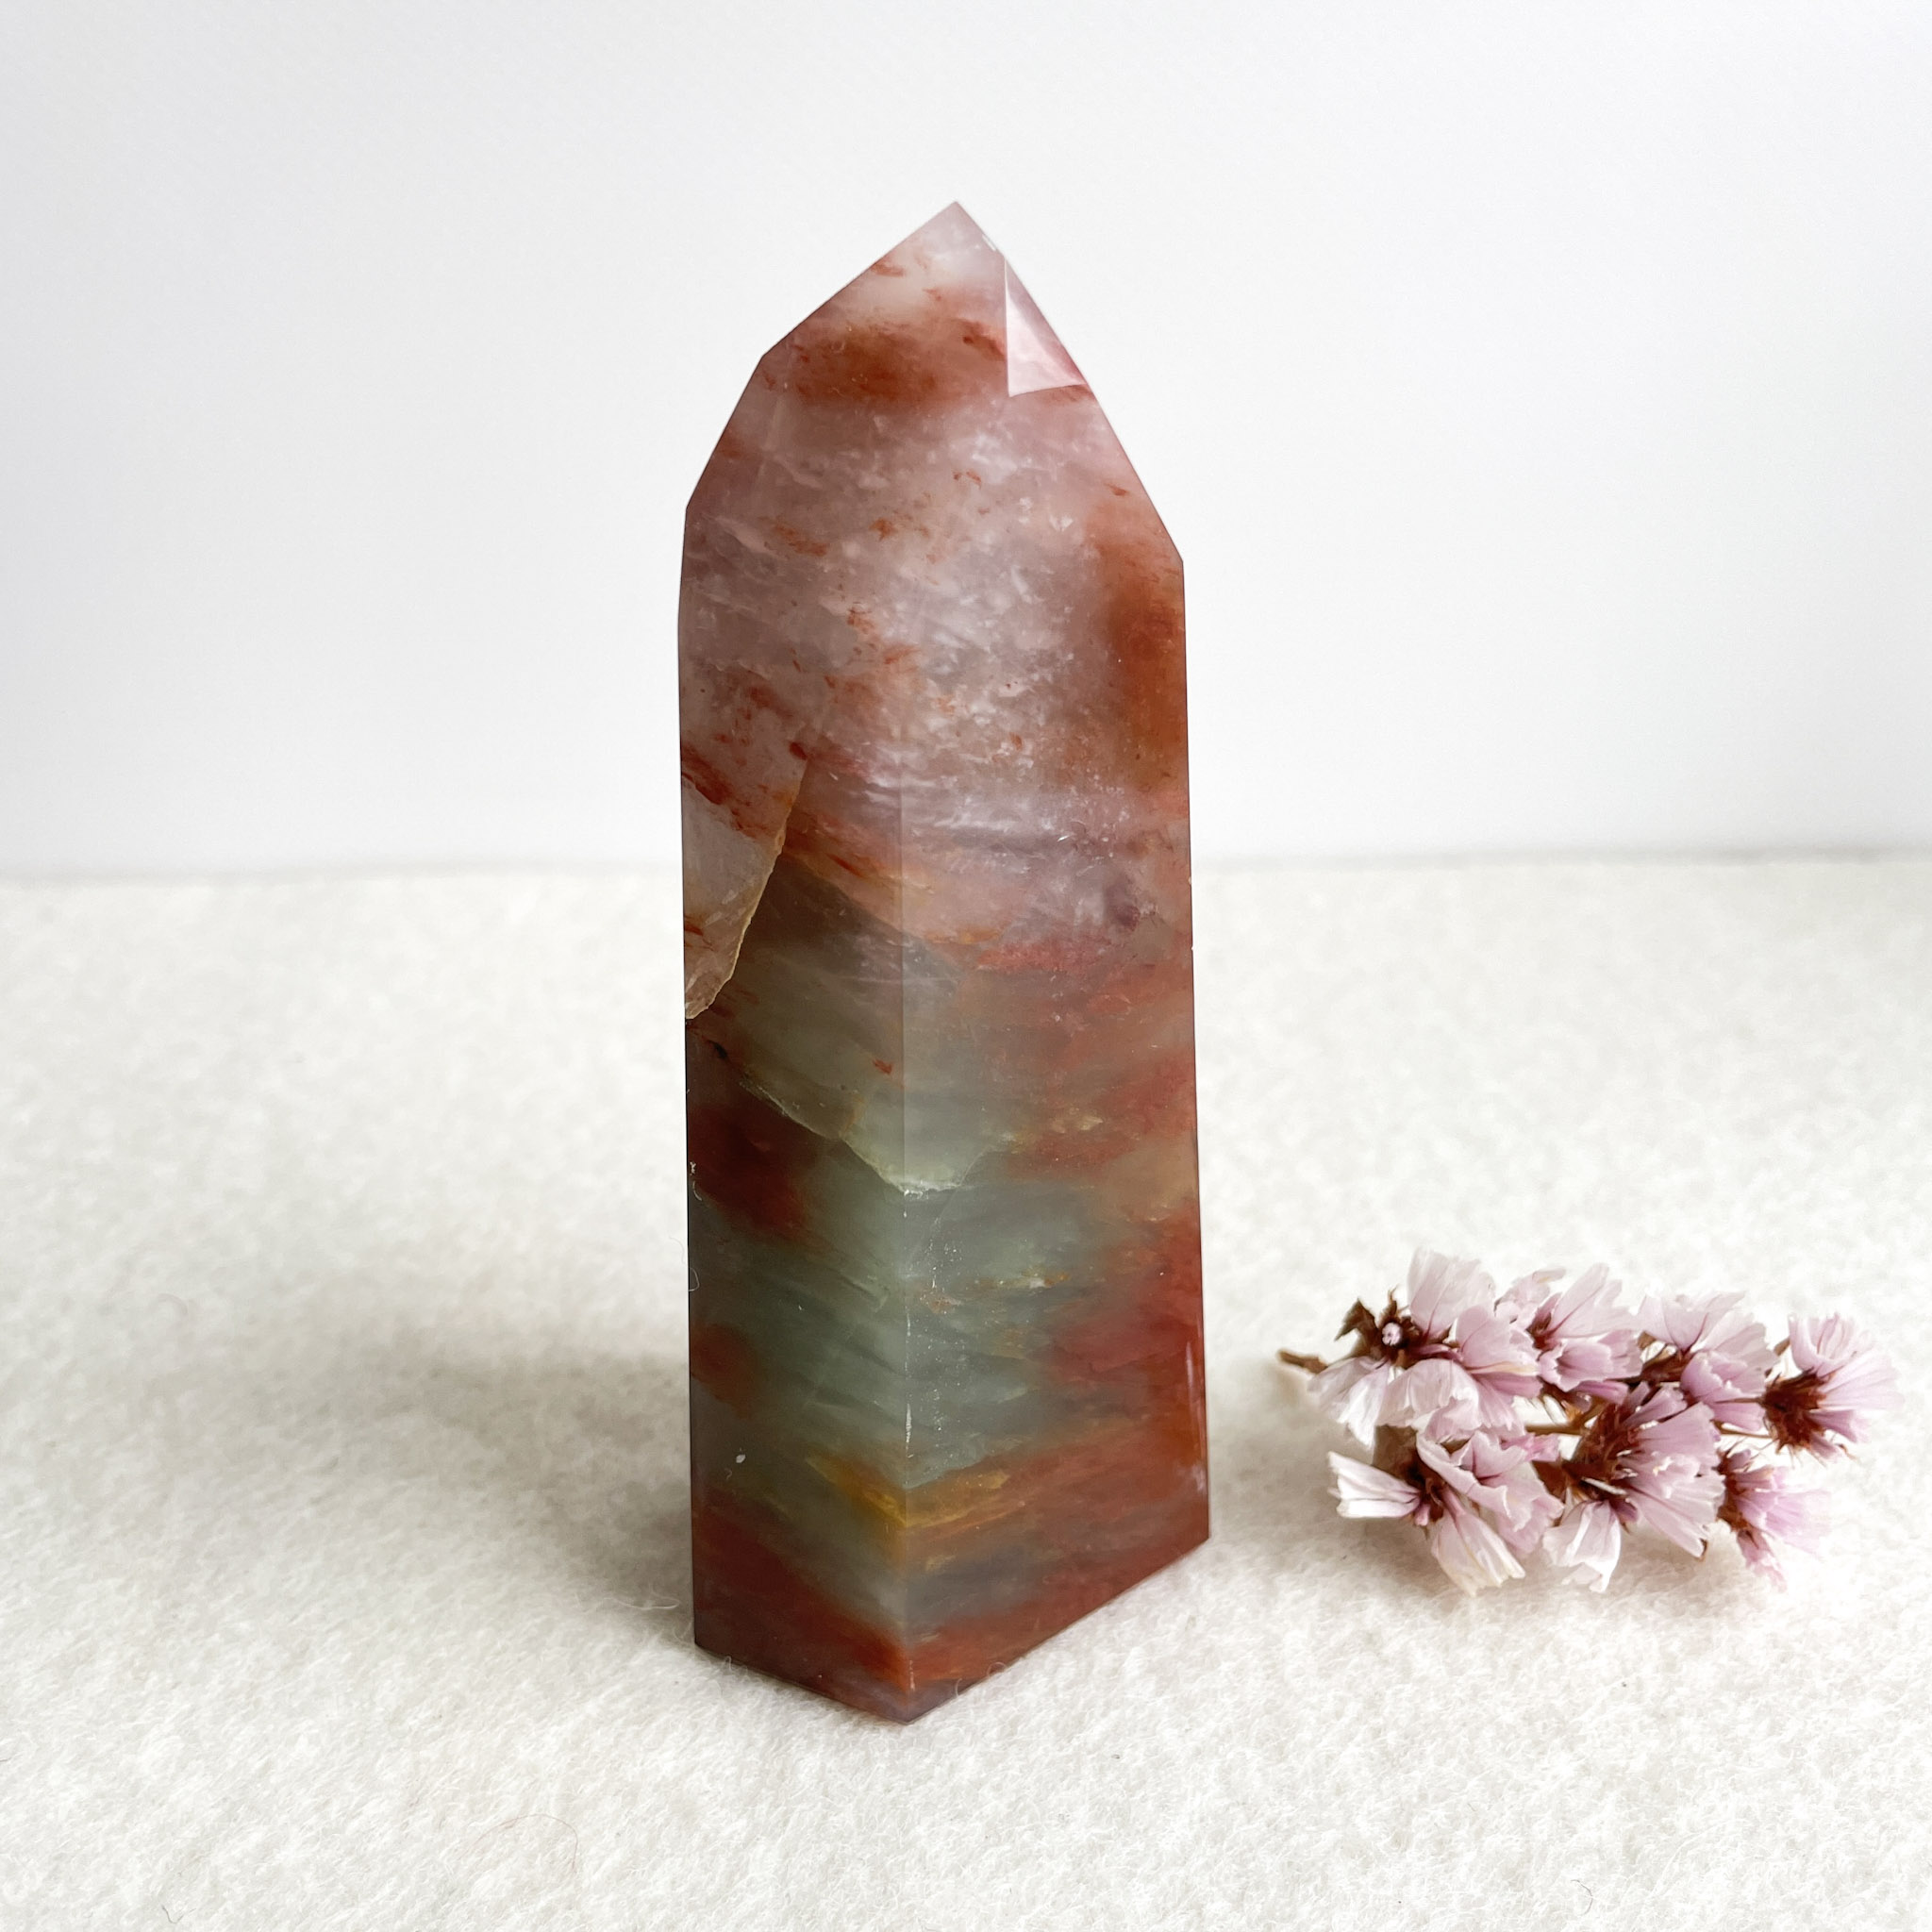 A polished multicolored crystal point standing on a white surface next to a small cluster of pink flowers, with a white background.